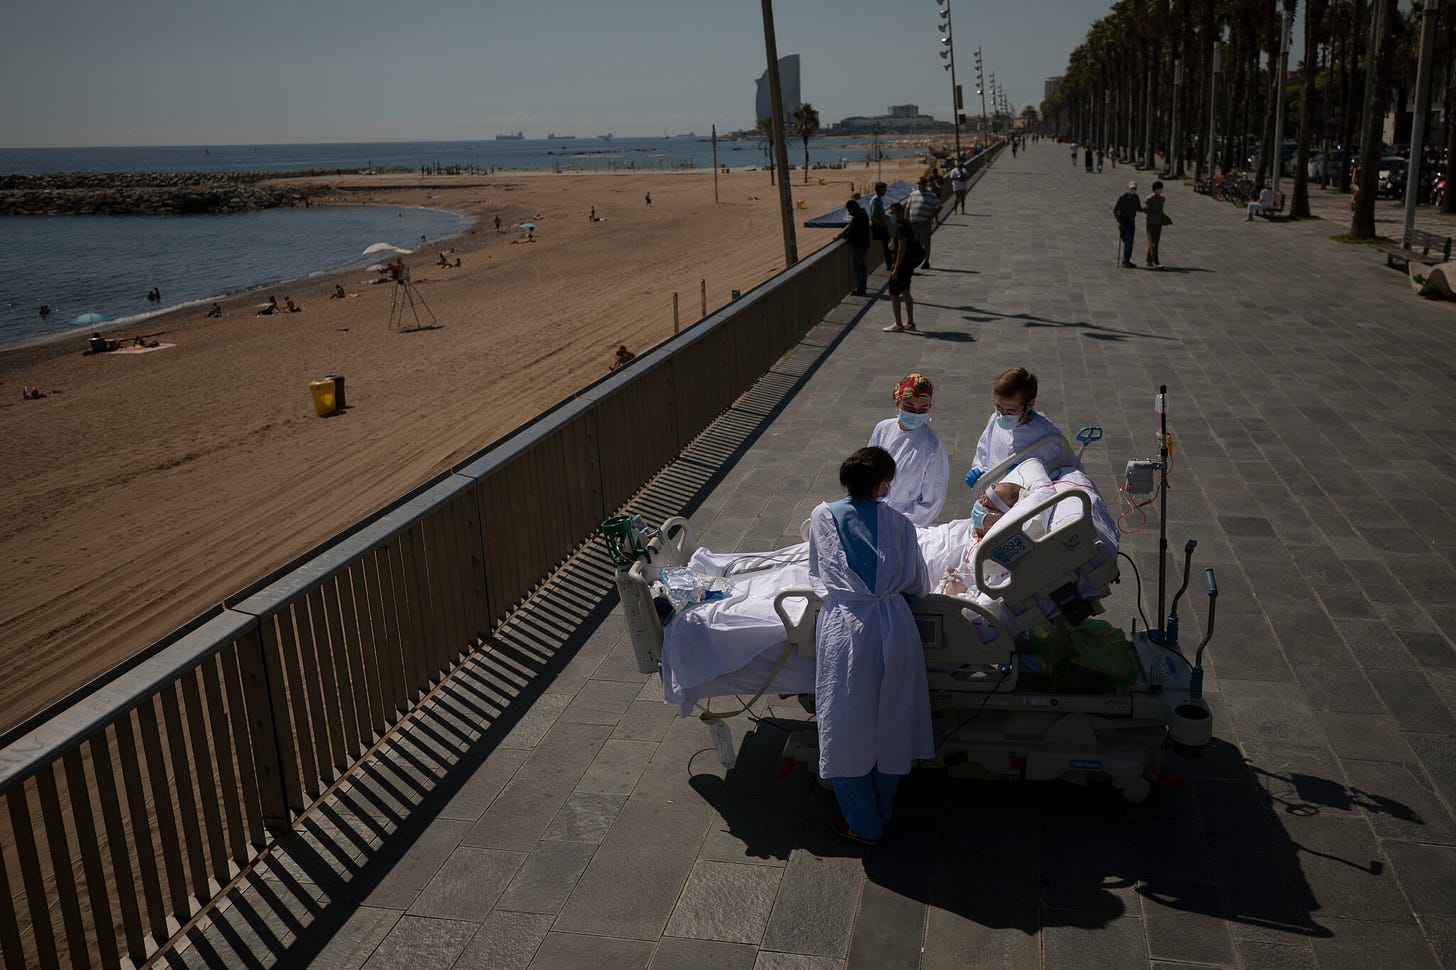 Barcelona, Sept. 4 Francisco España, 60, a Covid-19 patient who had spent weeks in an intensive care unit, was brought out of the hospital by medical staff for a calming look at the sea. Emilio Morenatti/Associated Press